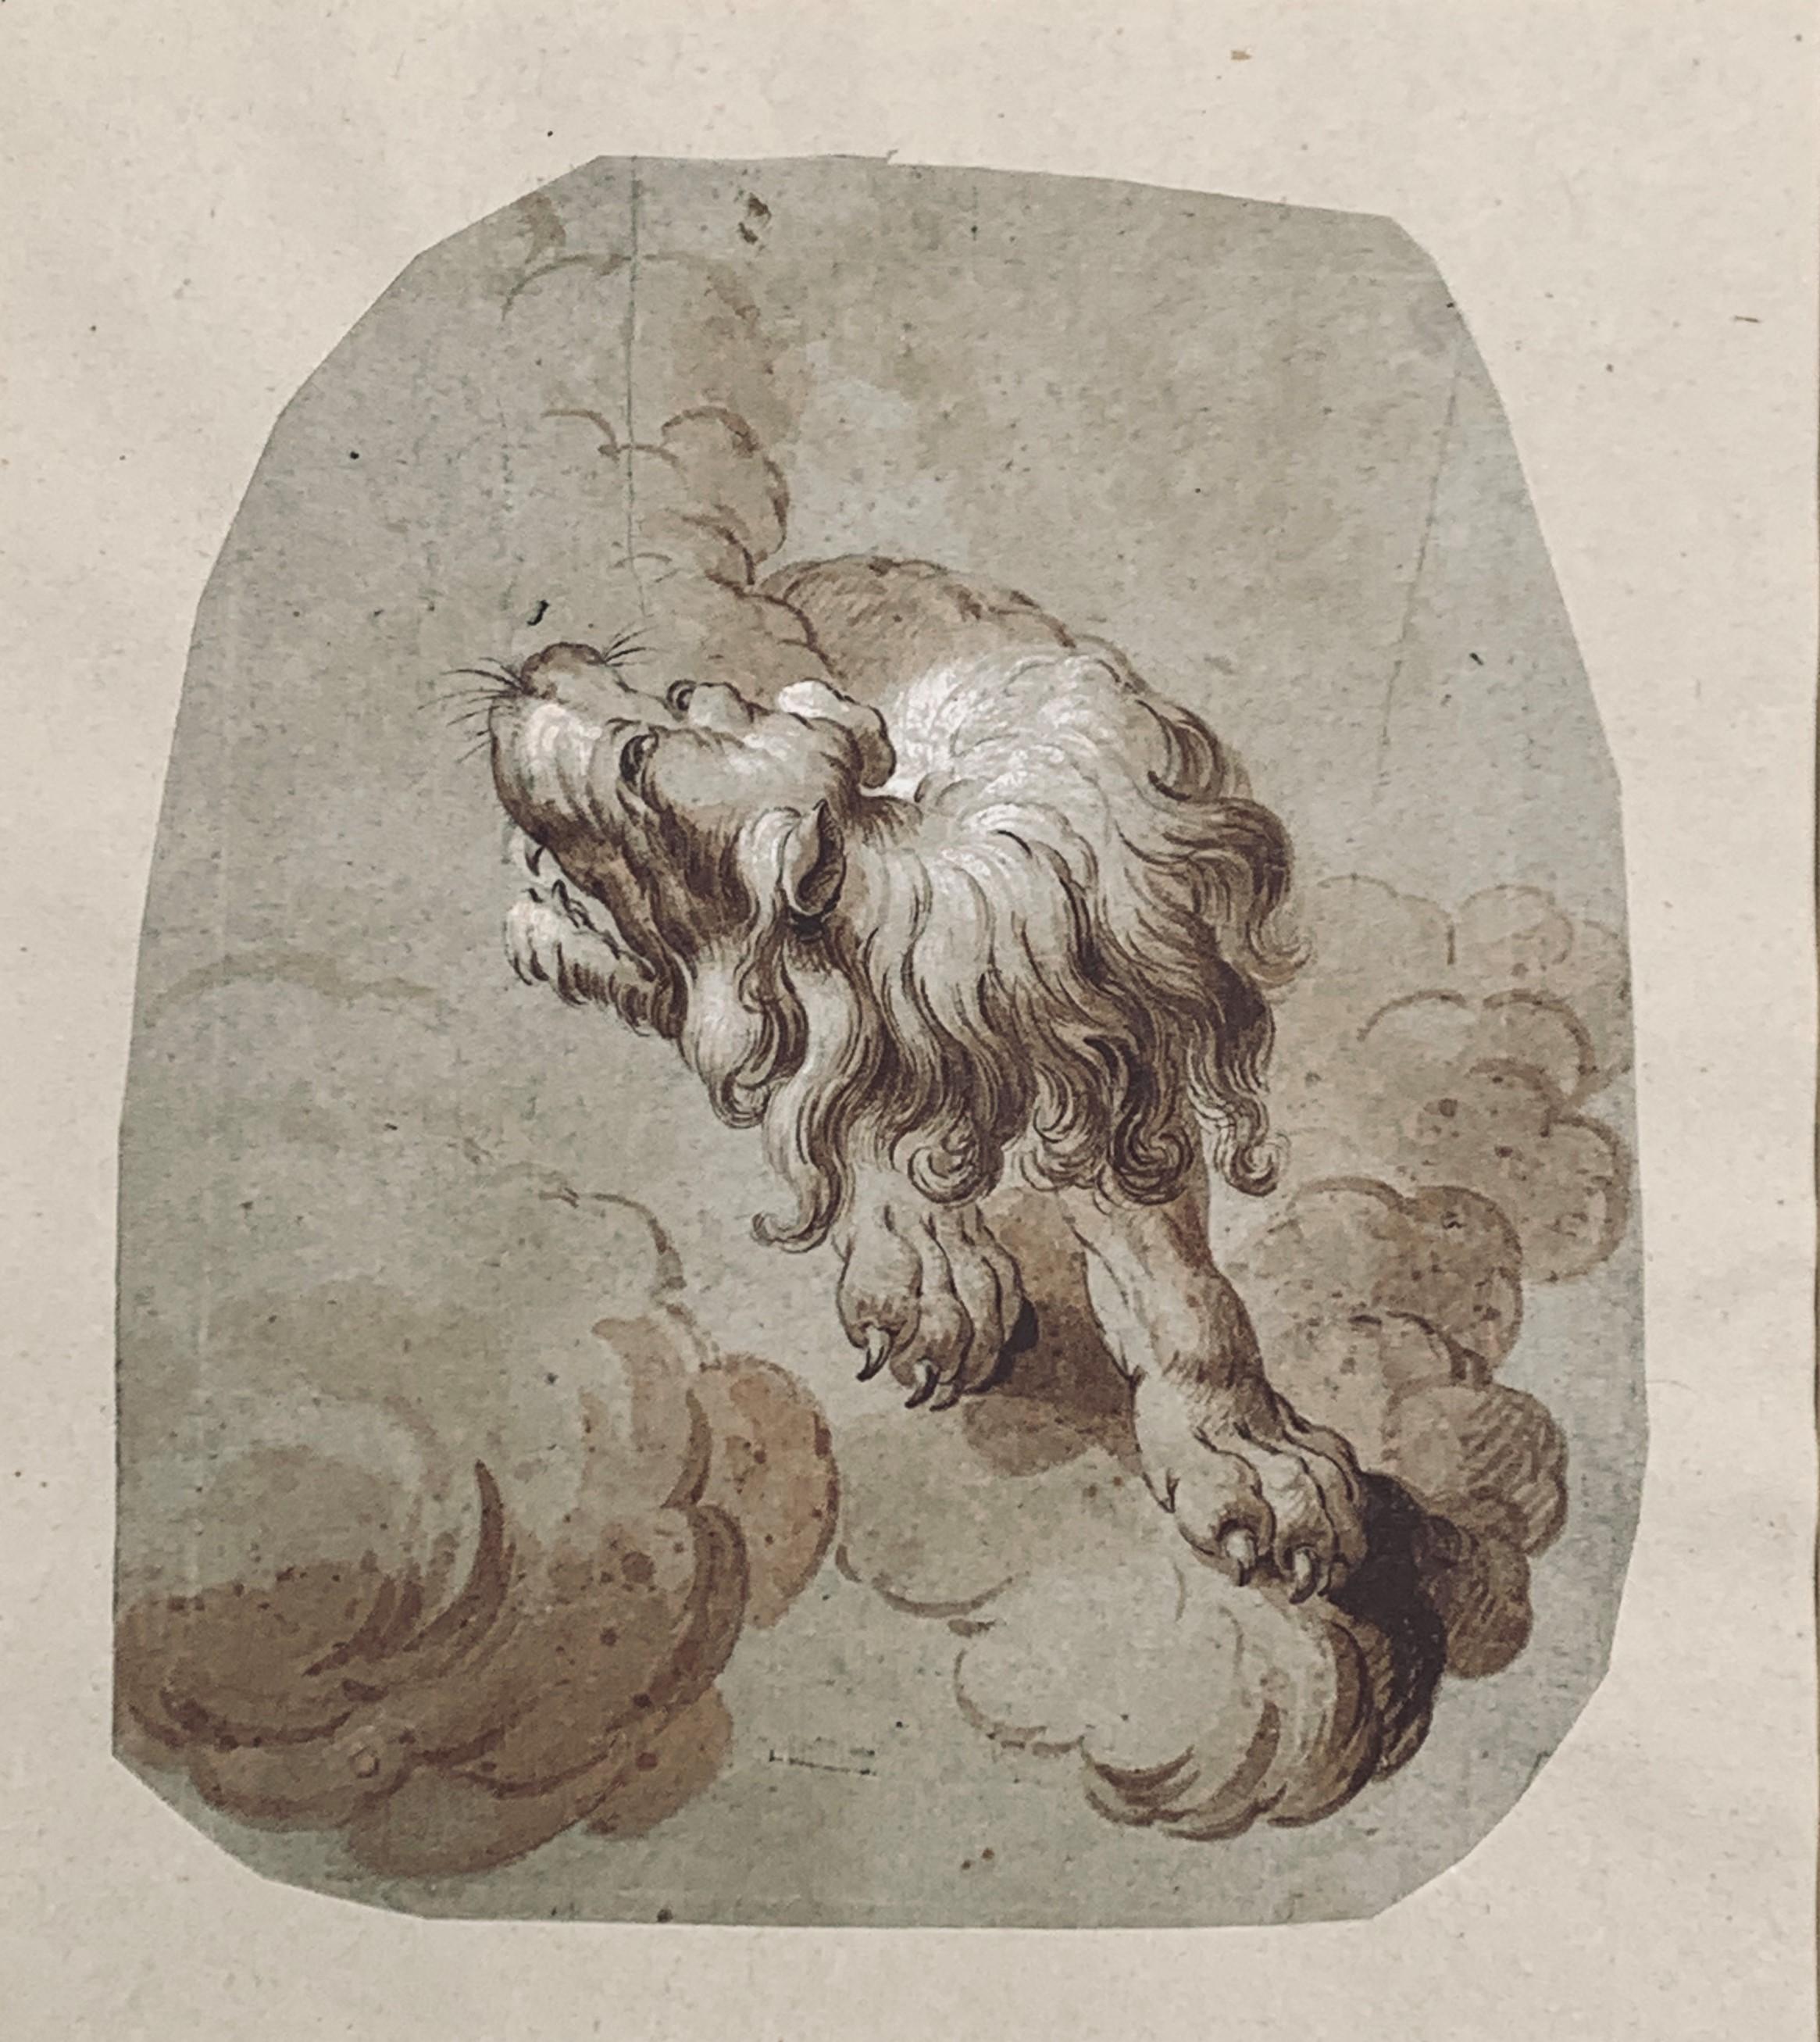 Unknown Animal Art - Netherlandish School Ink Drawing of a Lion, 17th/18th C.